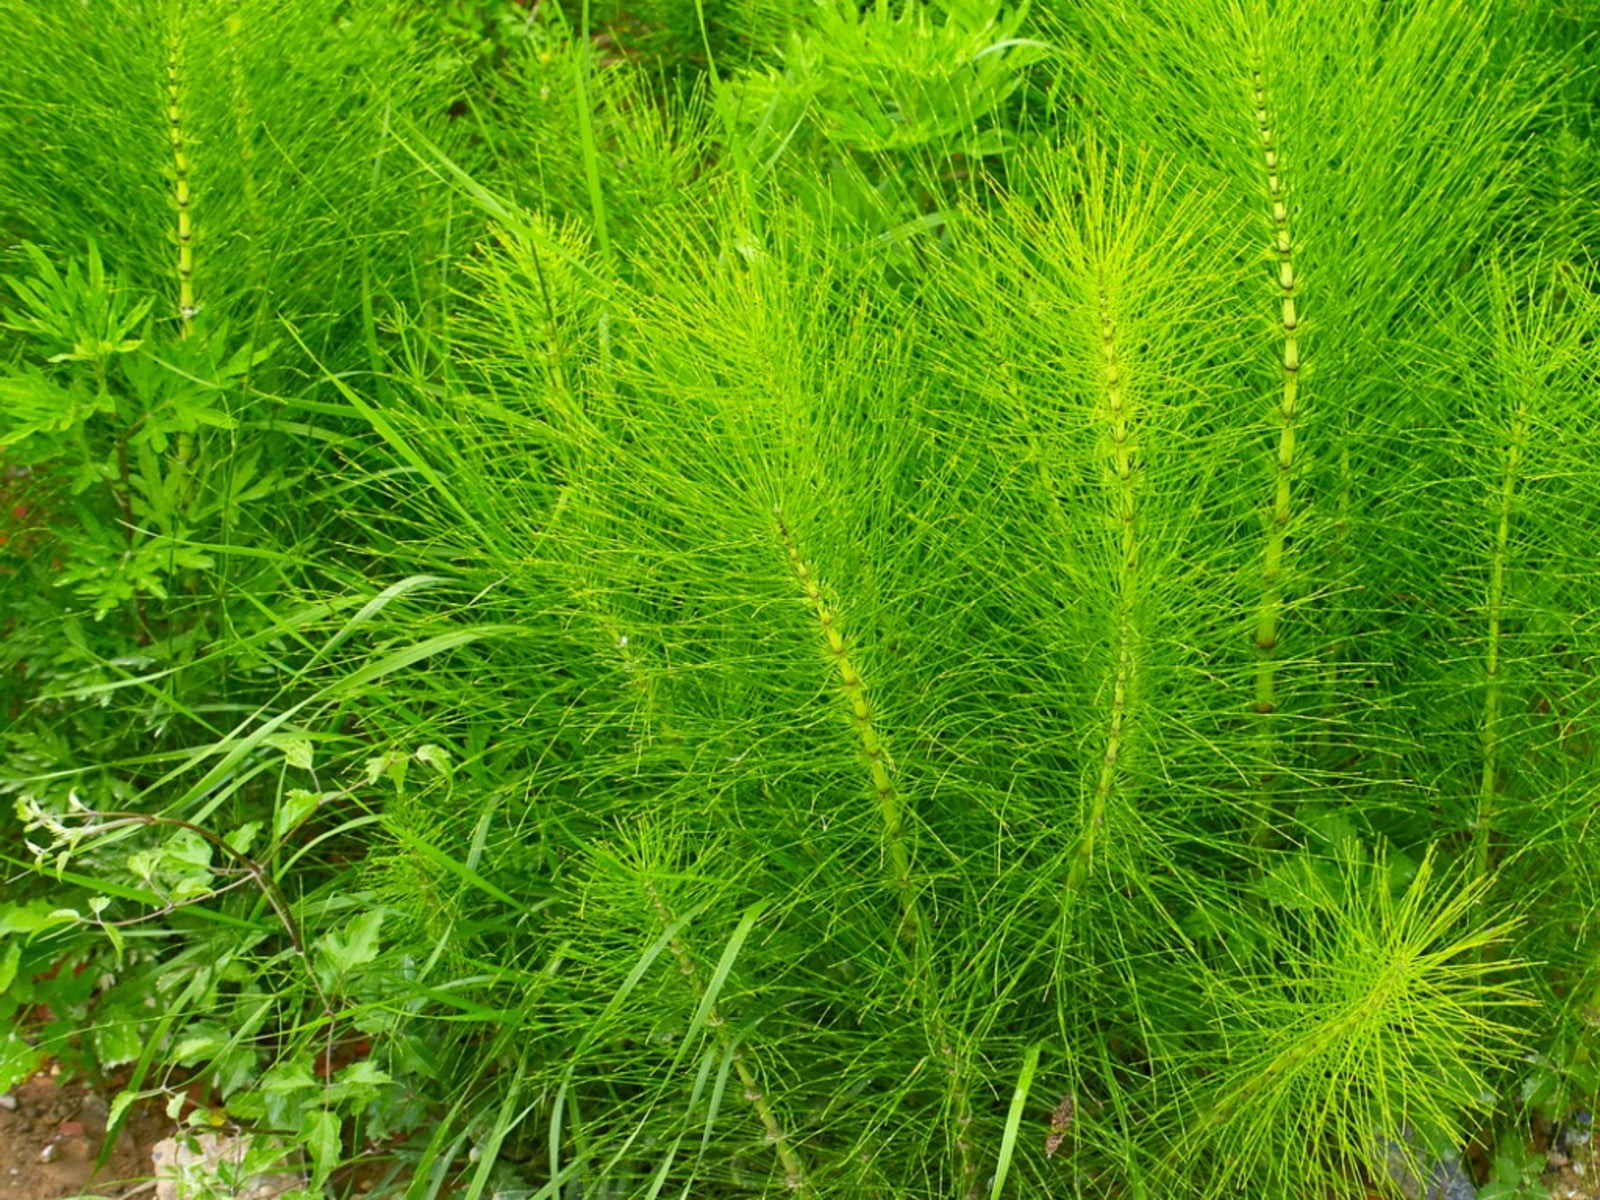 Horsetail Herb Uses – Information On Caring For Horsetail Plants